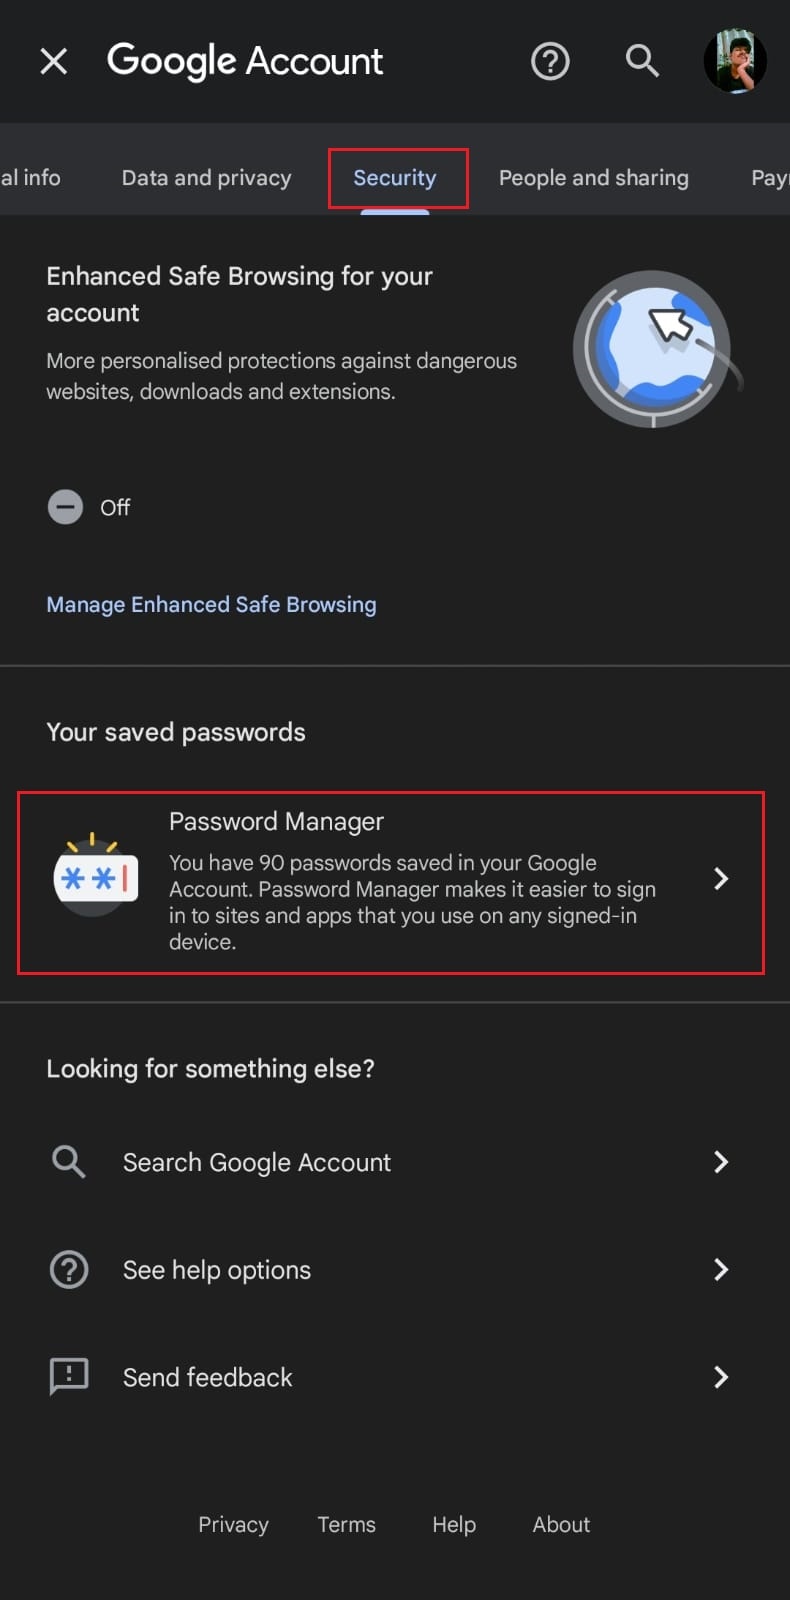 Move to the Security tab and tap on Password Manager under Your saved passwords